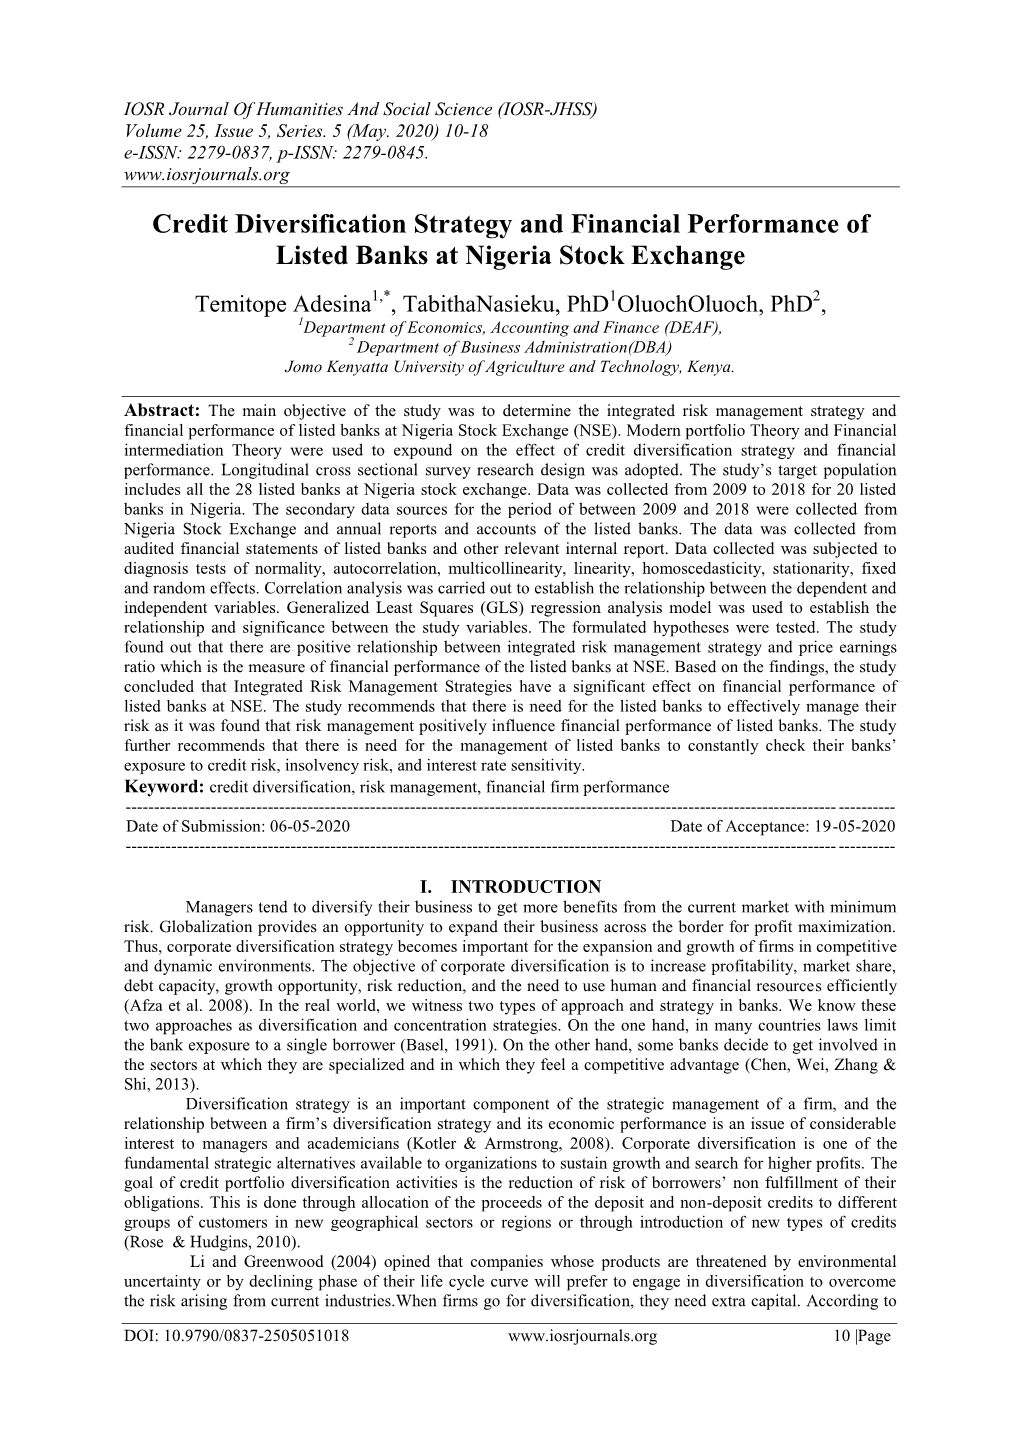 Credit Diversification Strategy and Financial Performance of Listed Banks at Nigeria Stock Exchange